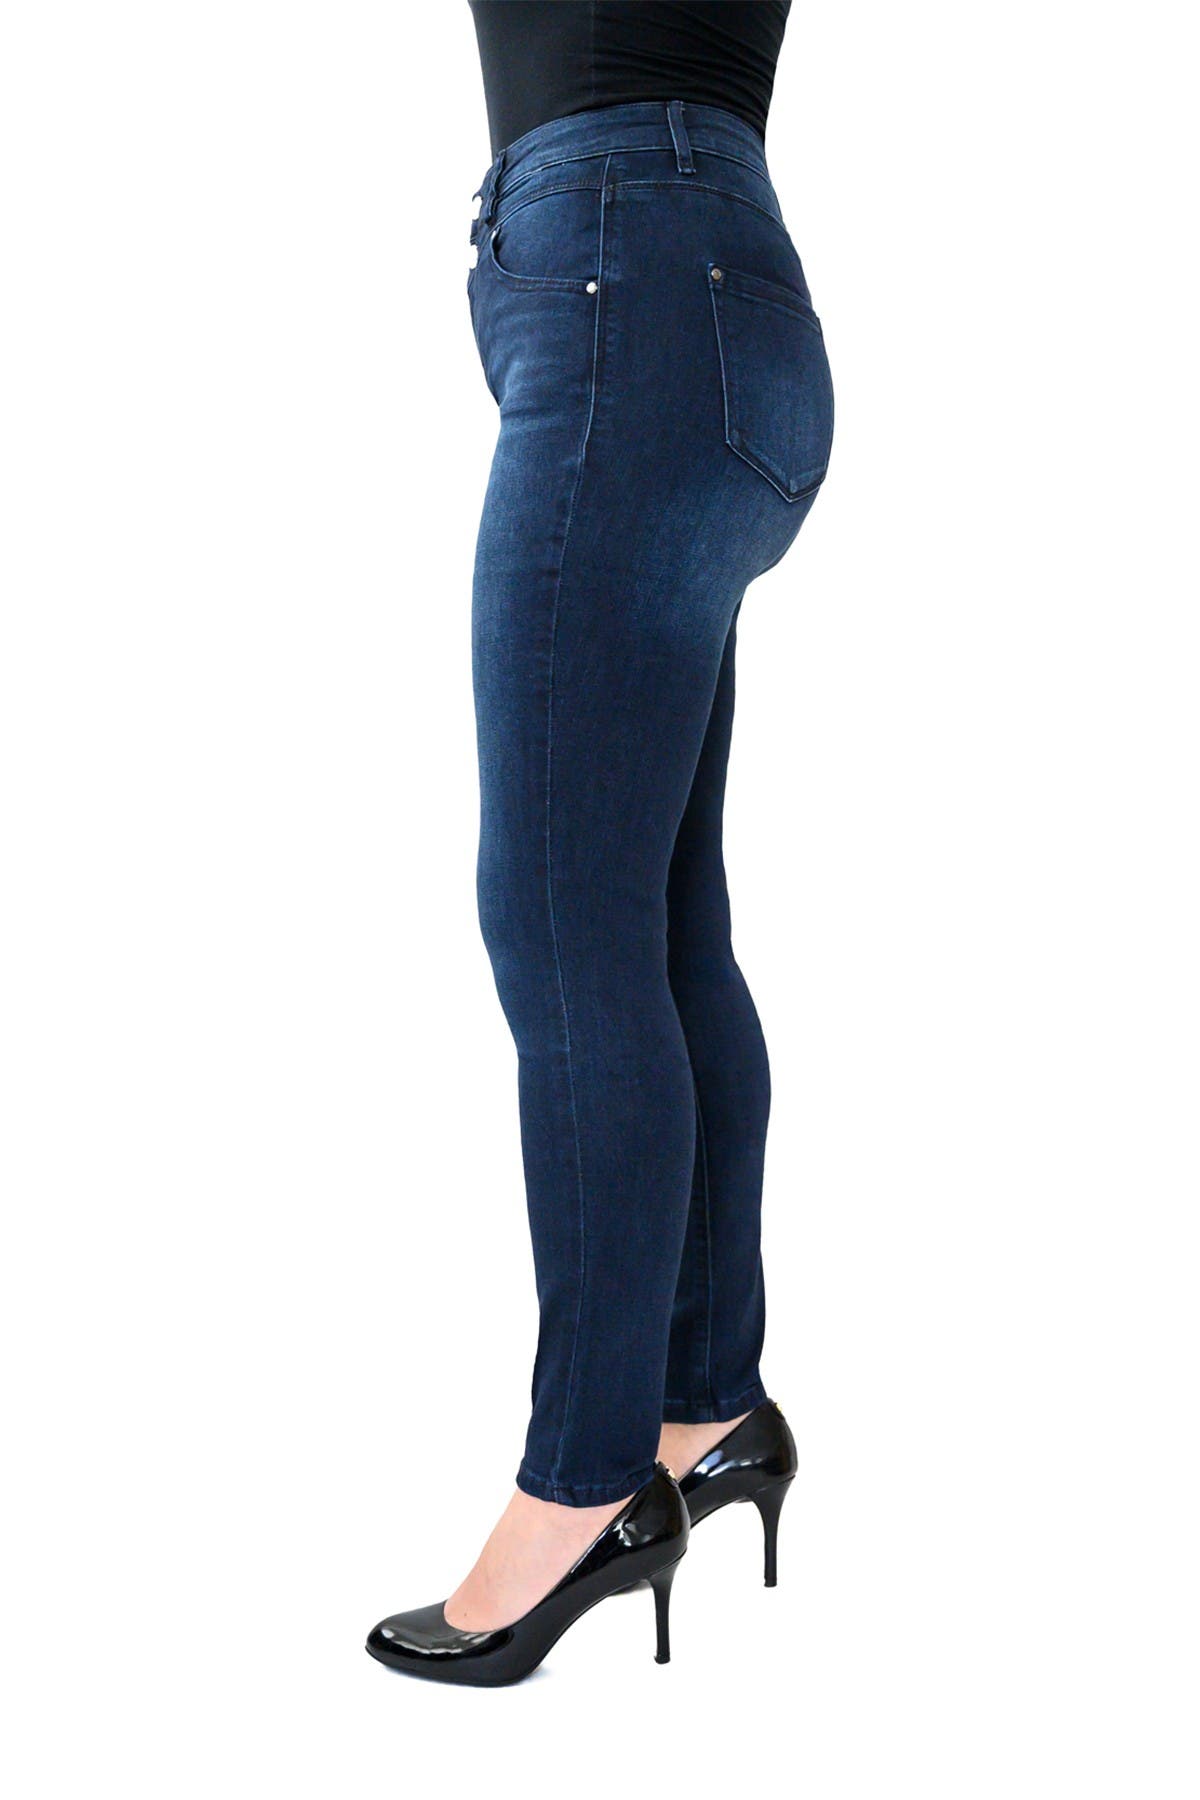 curve appeal jeans total control